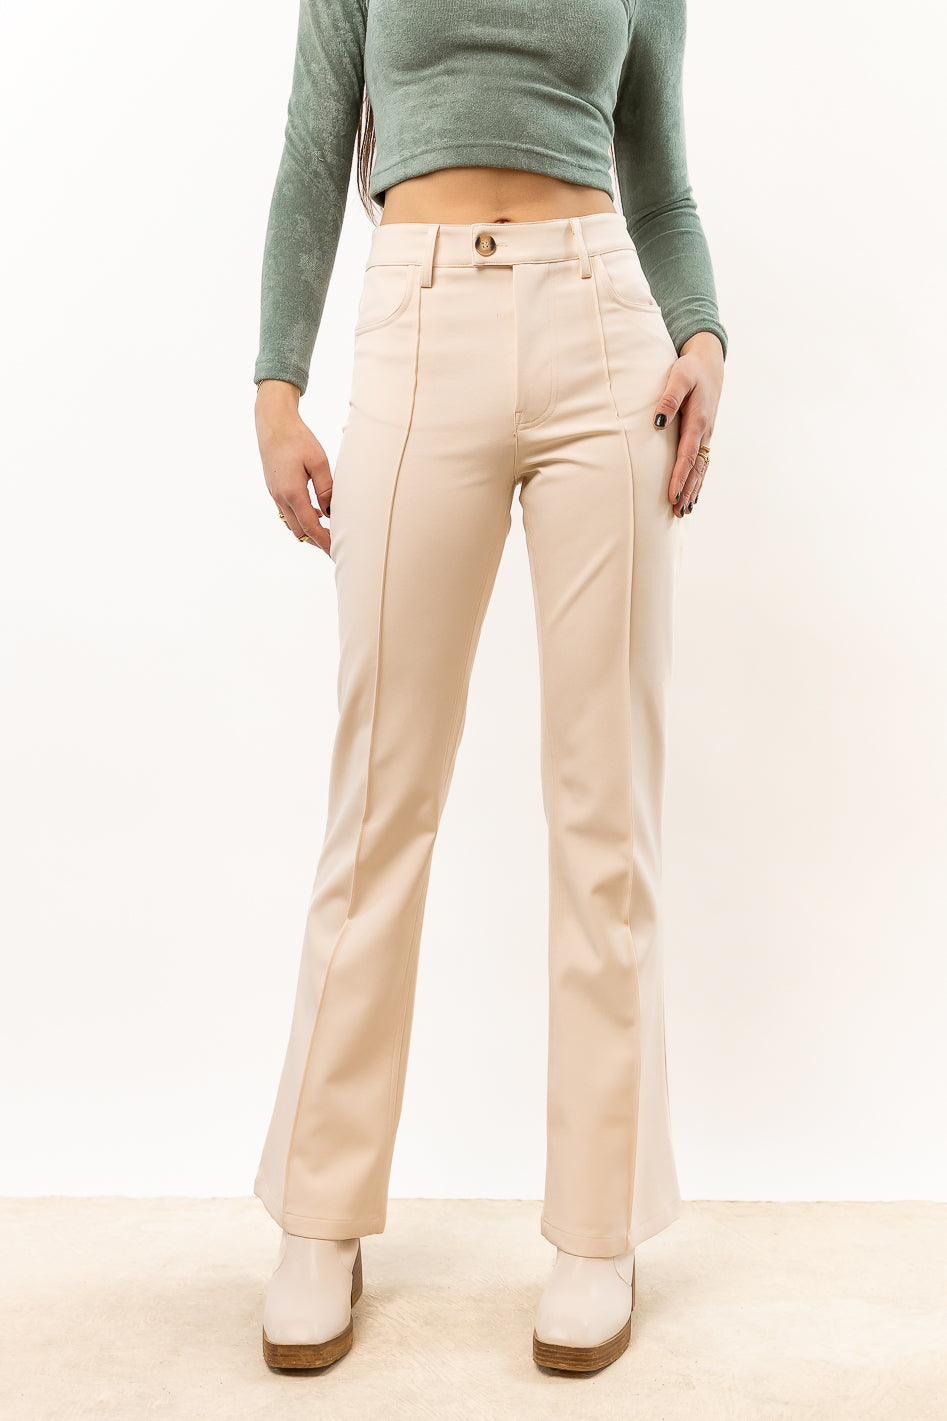 Women's High-rise Slim Fit Kick Flare Pull-on Pants - A New Day™ Cream 20 :  Target